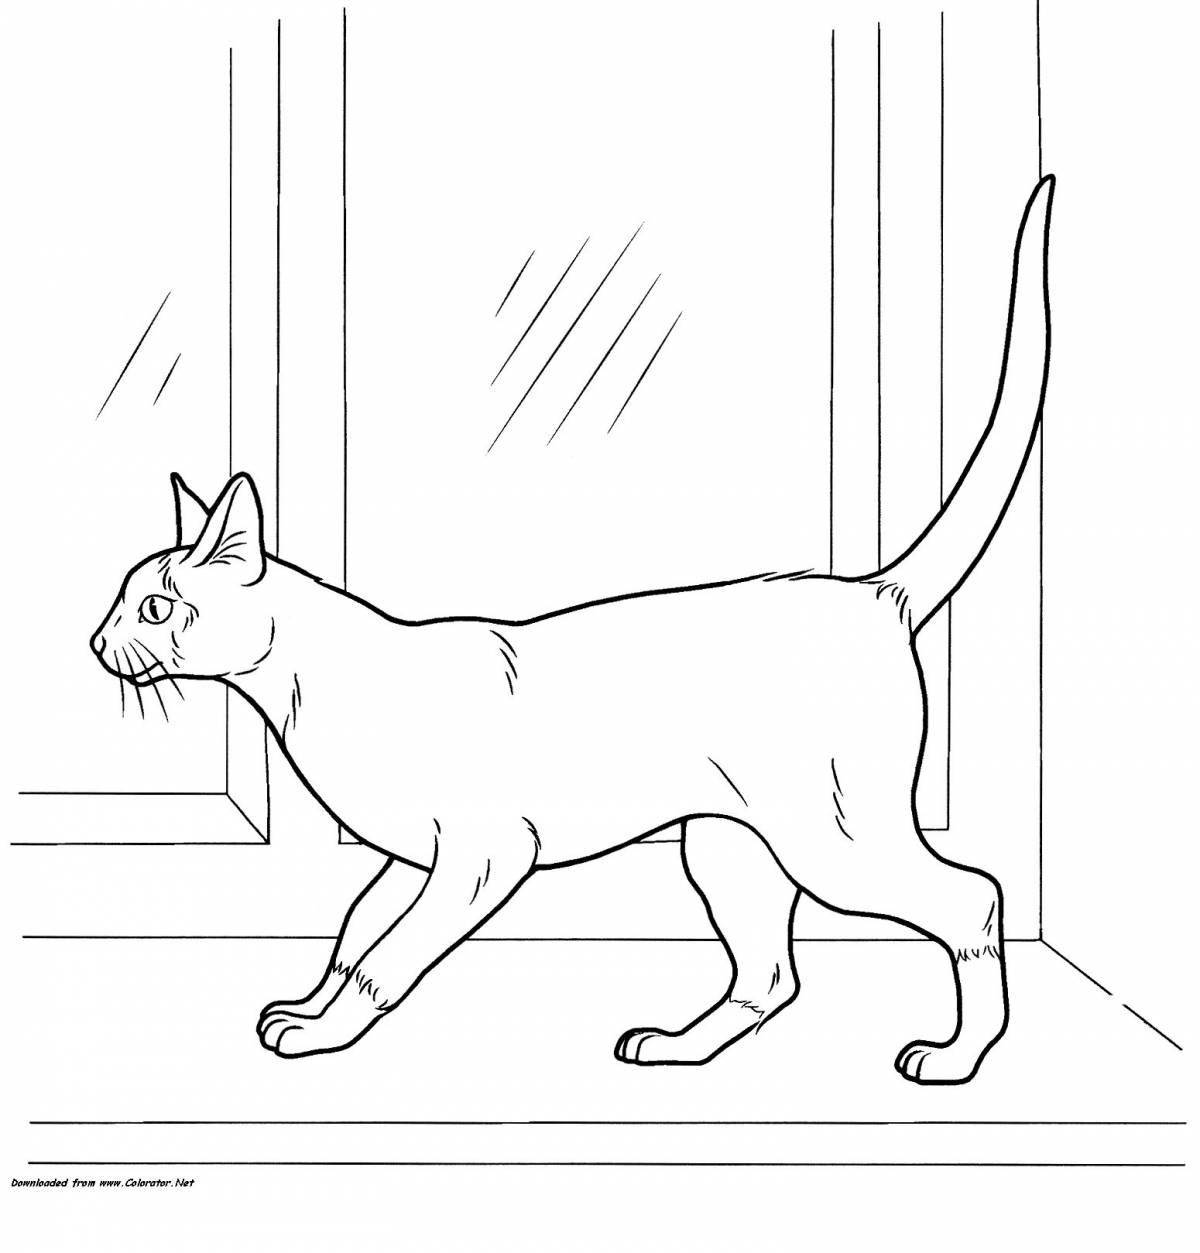 Coloring page energetic sitting cat